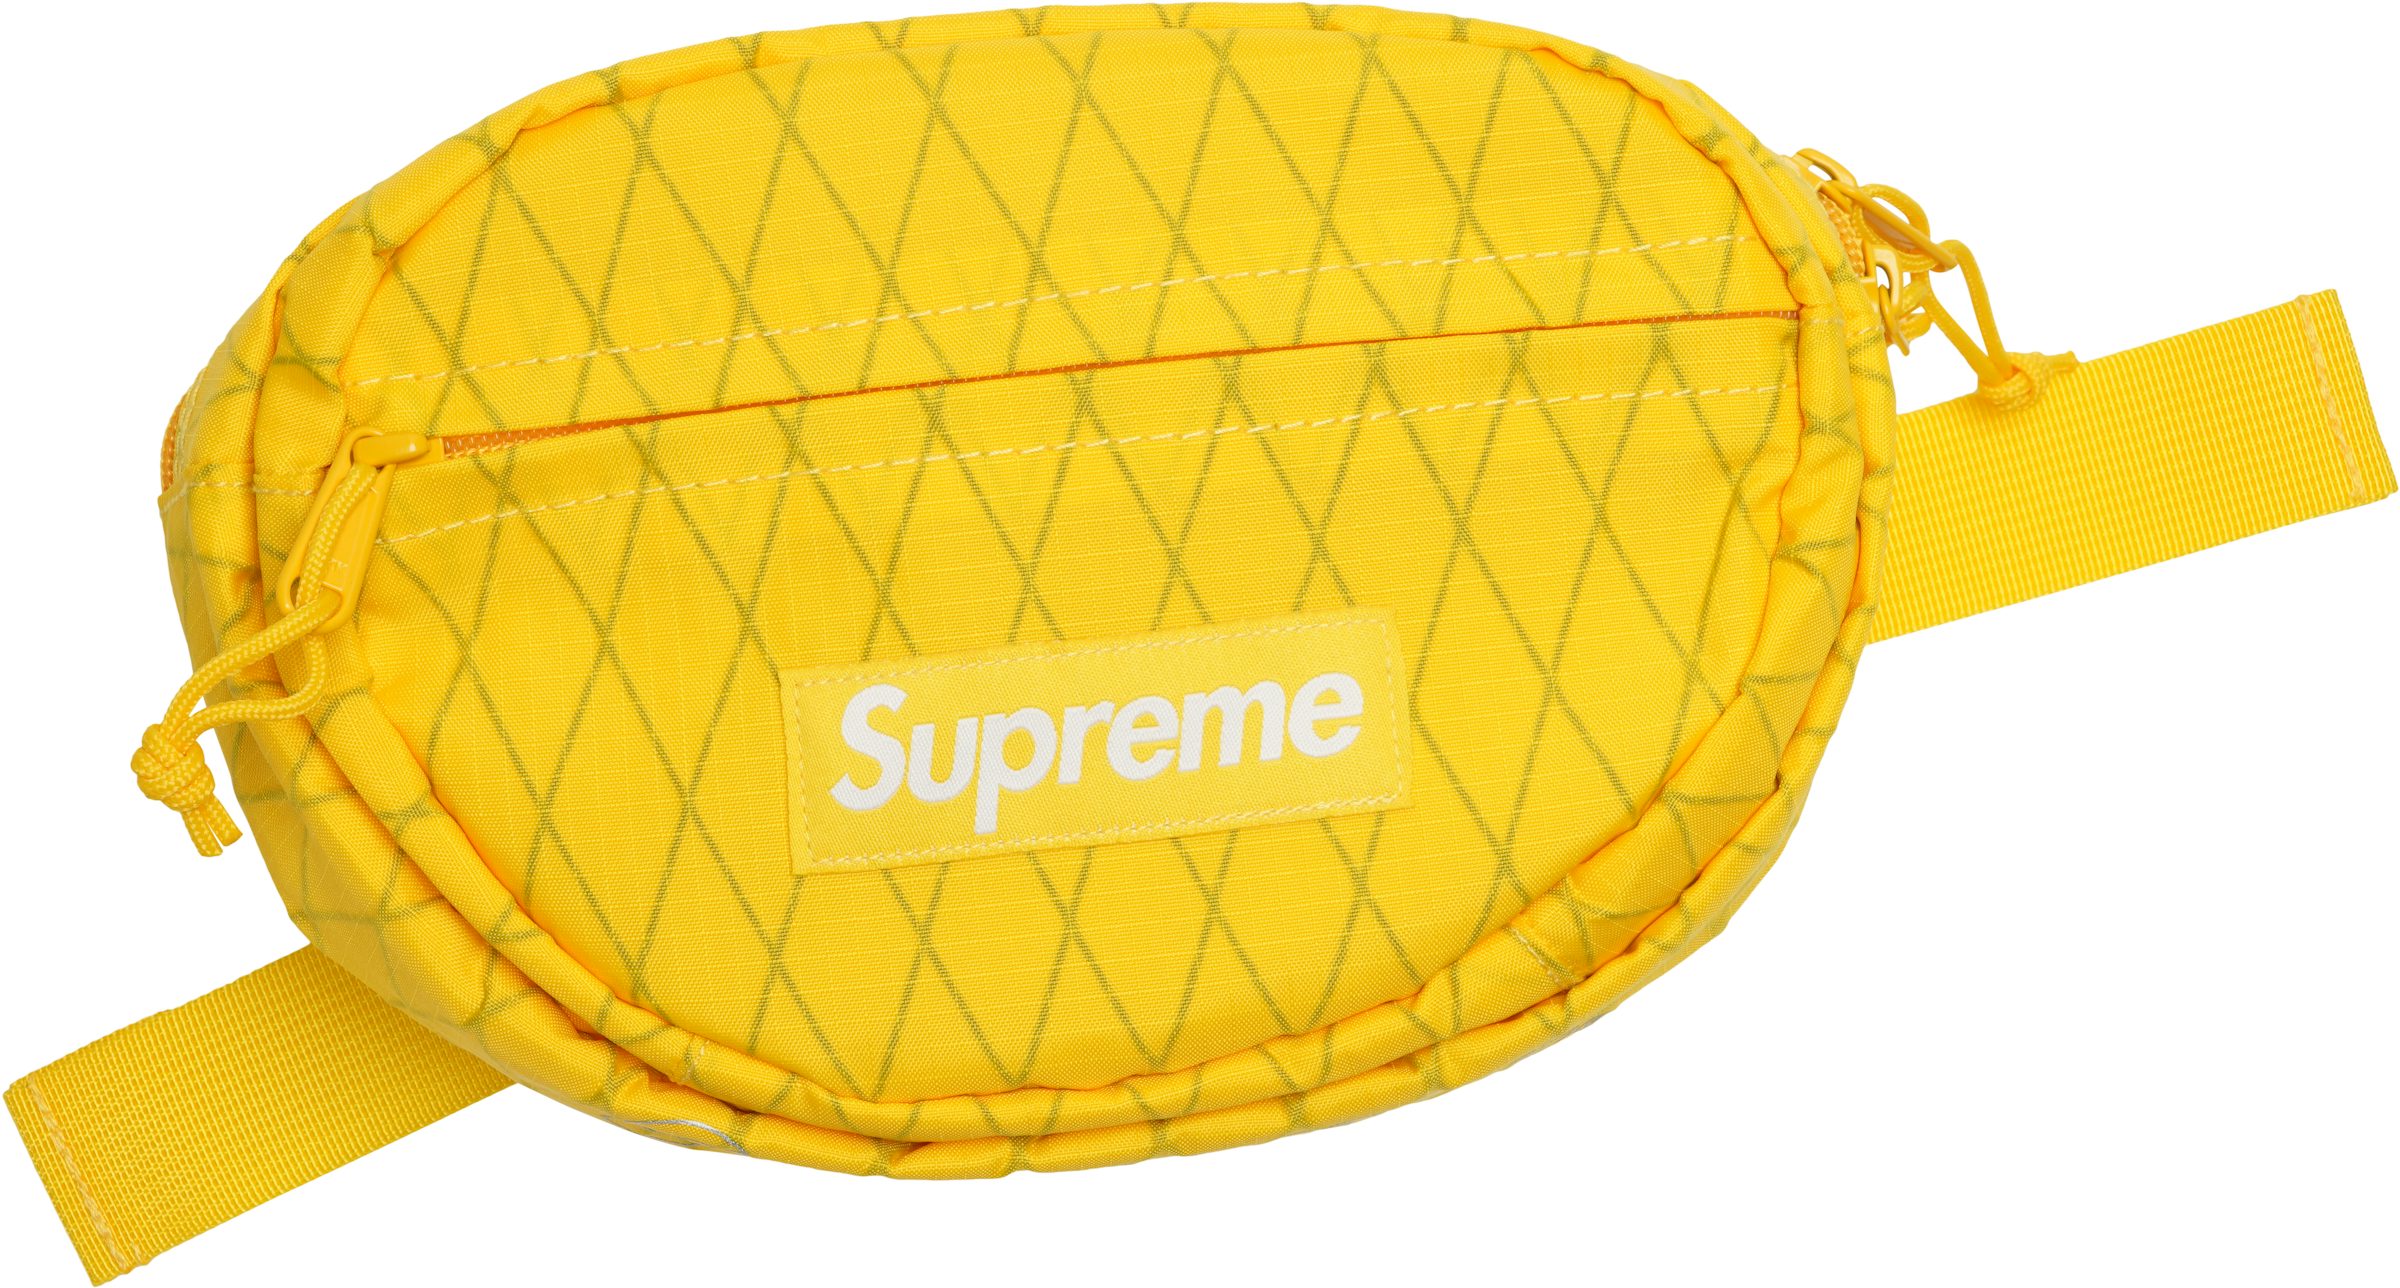 WHAT FITS IN SUPREME FW18 WAIST BAG (SIZING) 